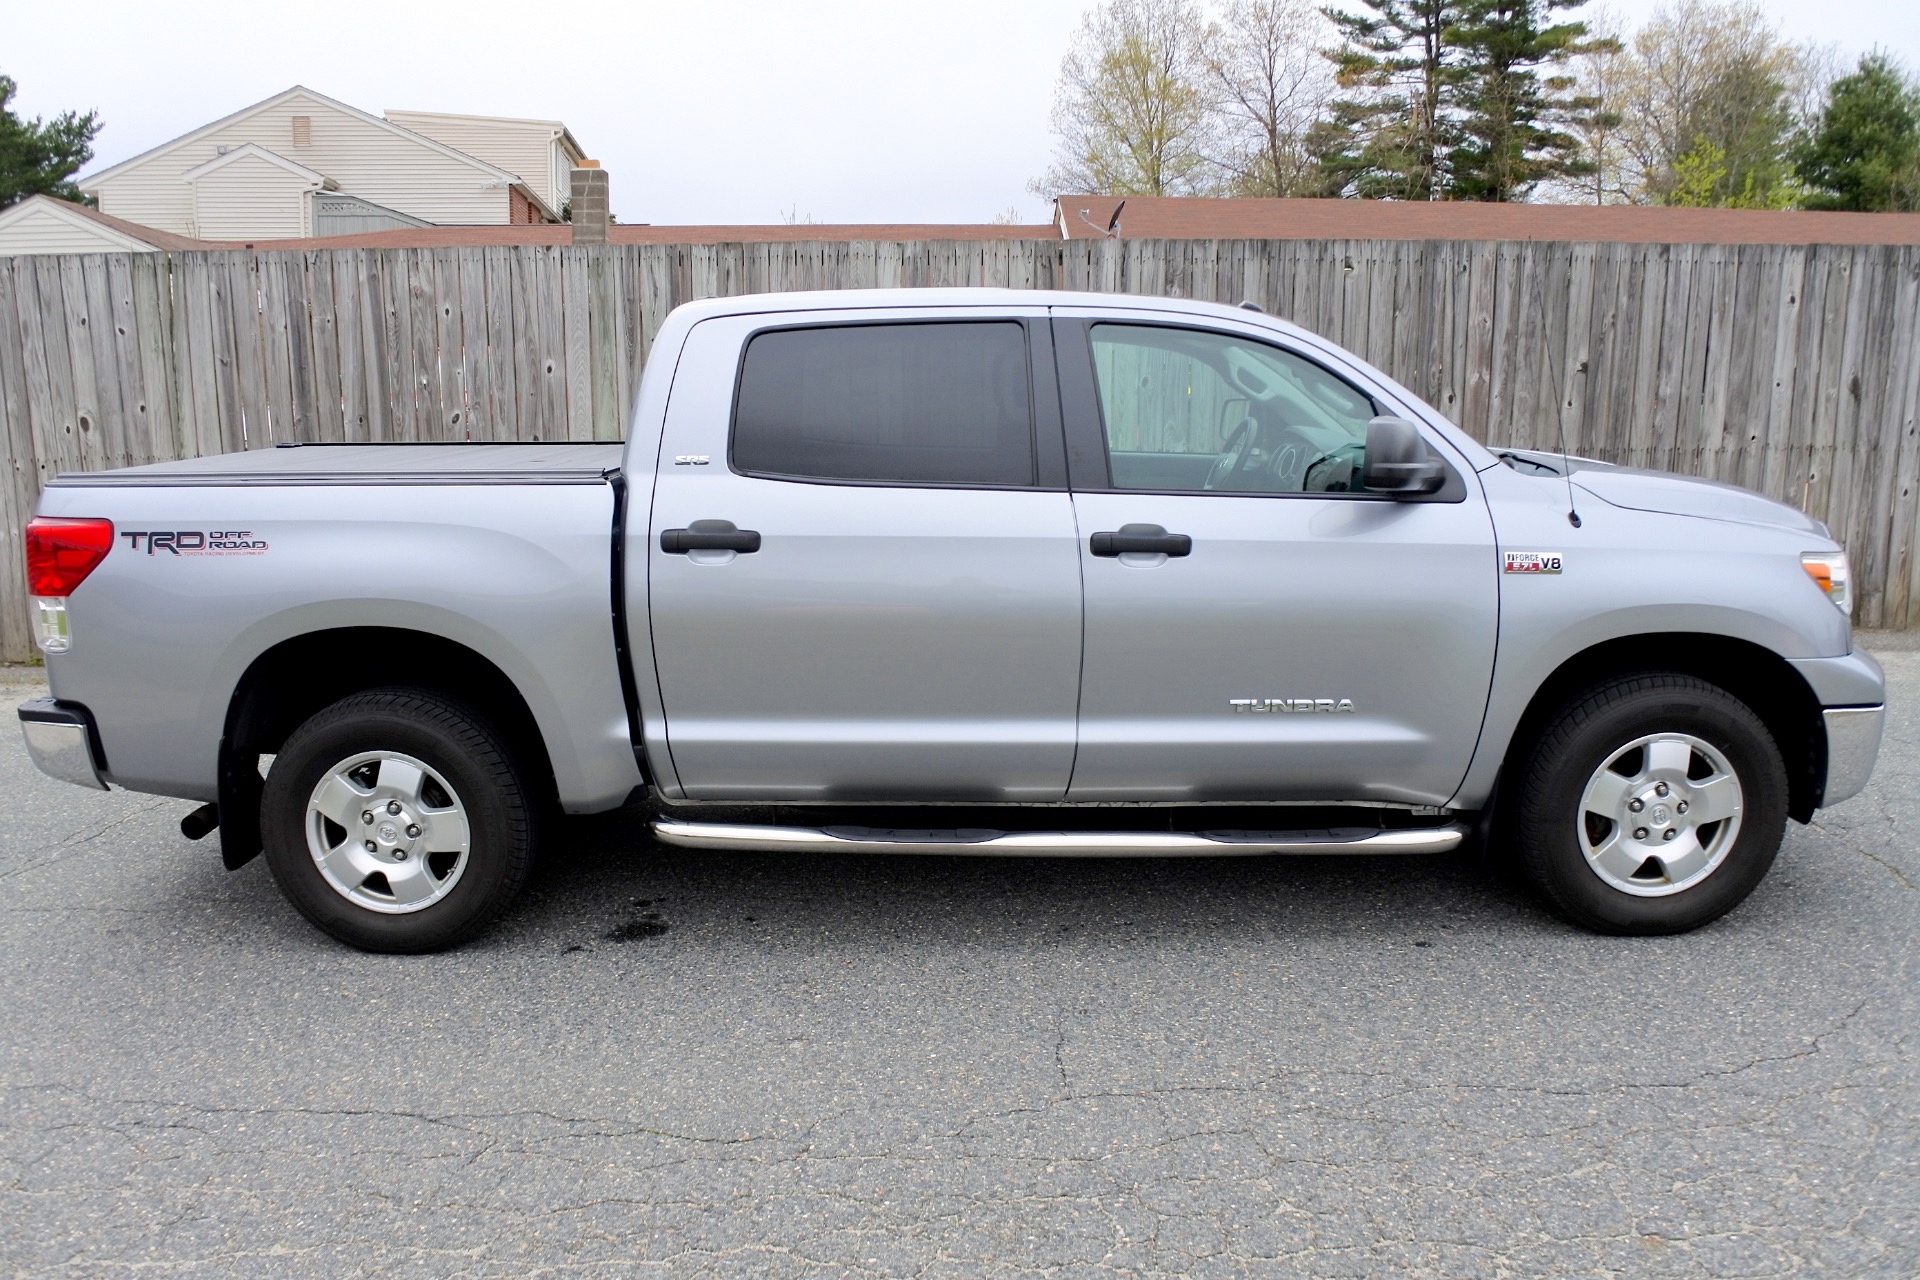 Used 2013 Toyota Tundra 4wd Truck CrewMax 5.7L V8 6-Spd AT (Natl) For